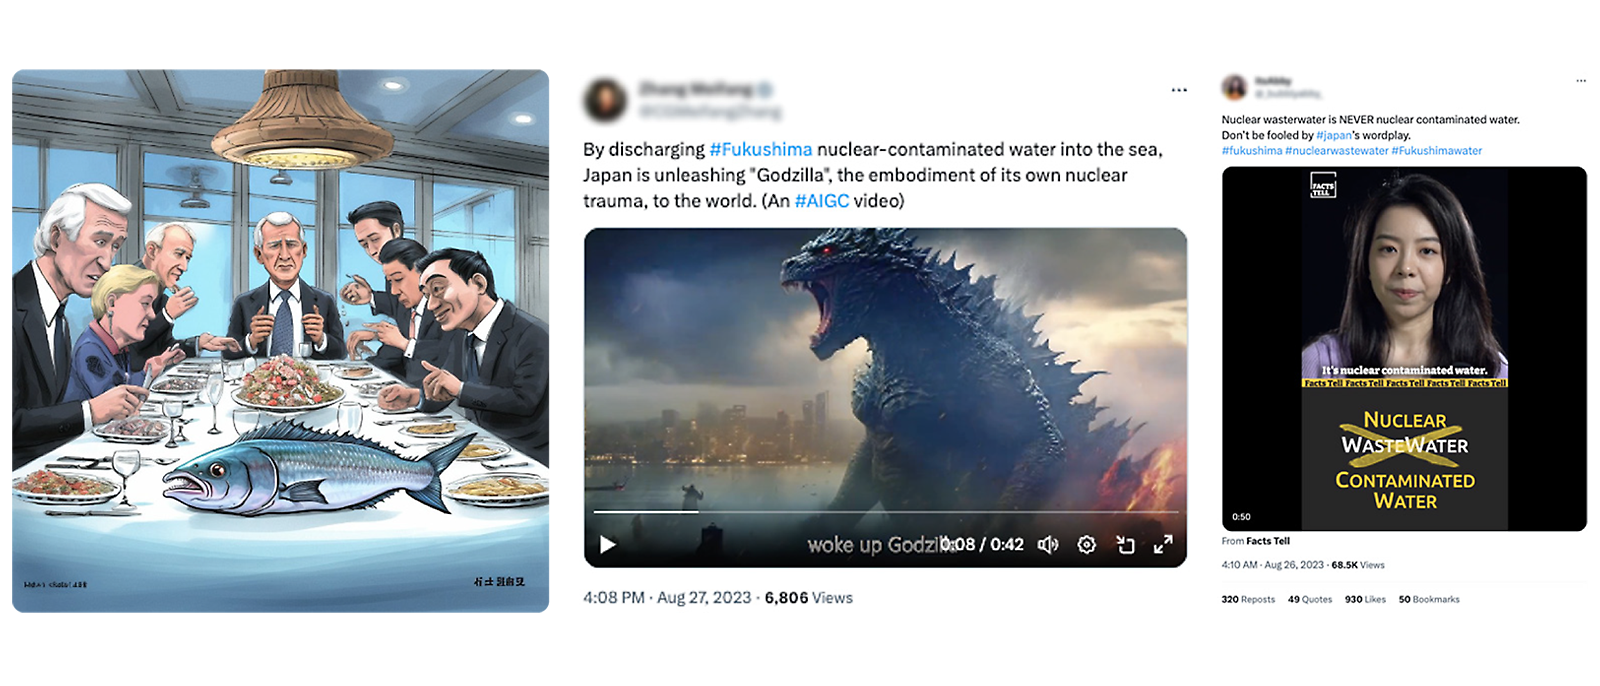 A composite image featuring a satirical illustration of people a screenshot of a video depicting godzilla, and a social media post